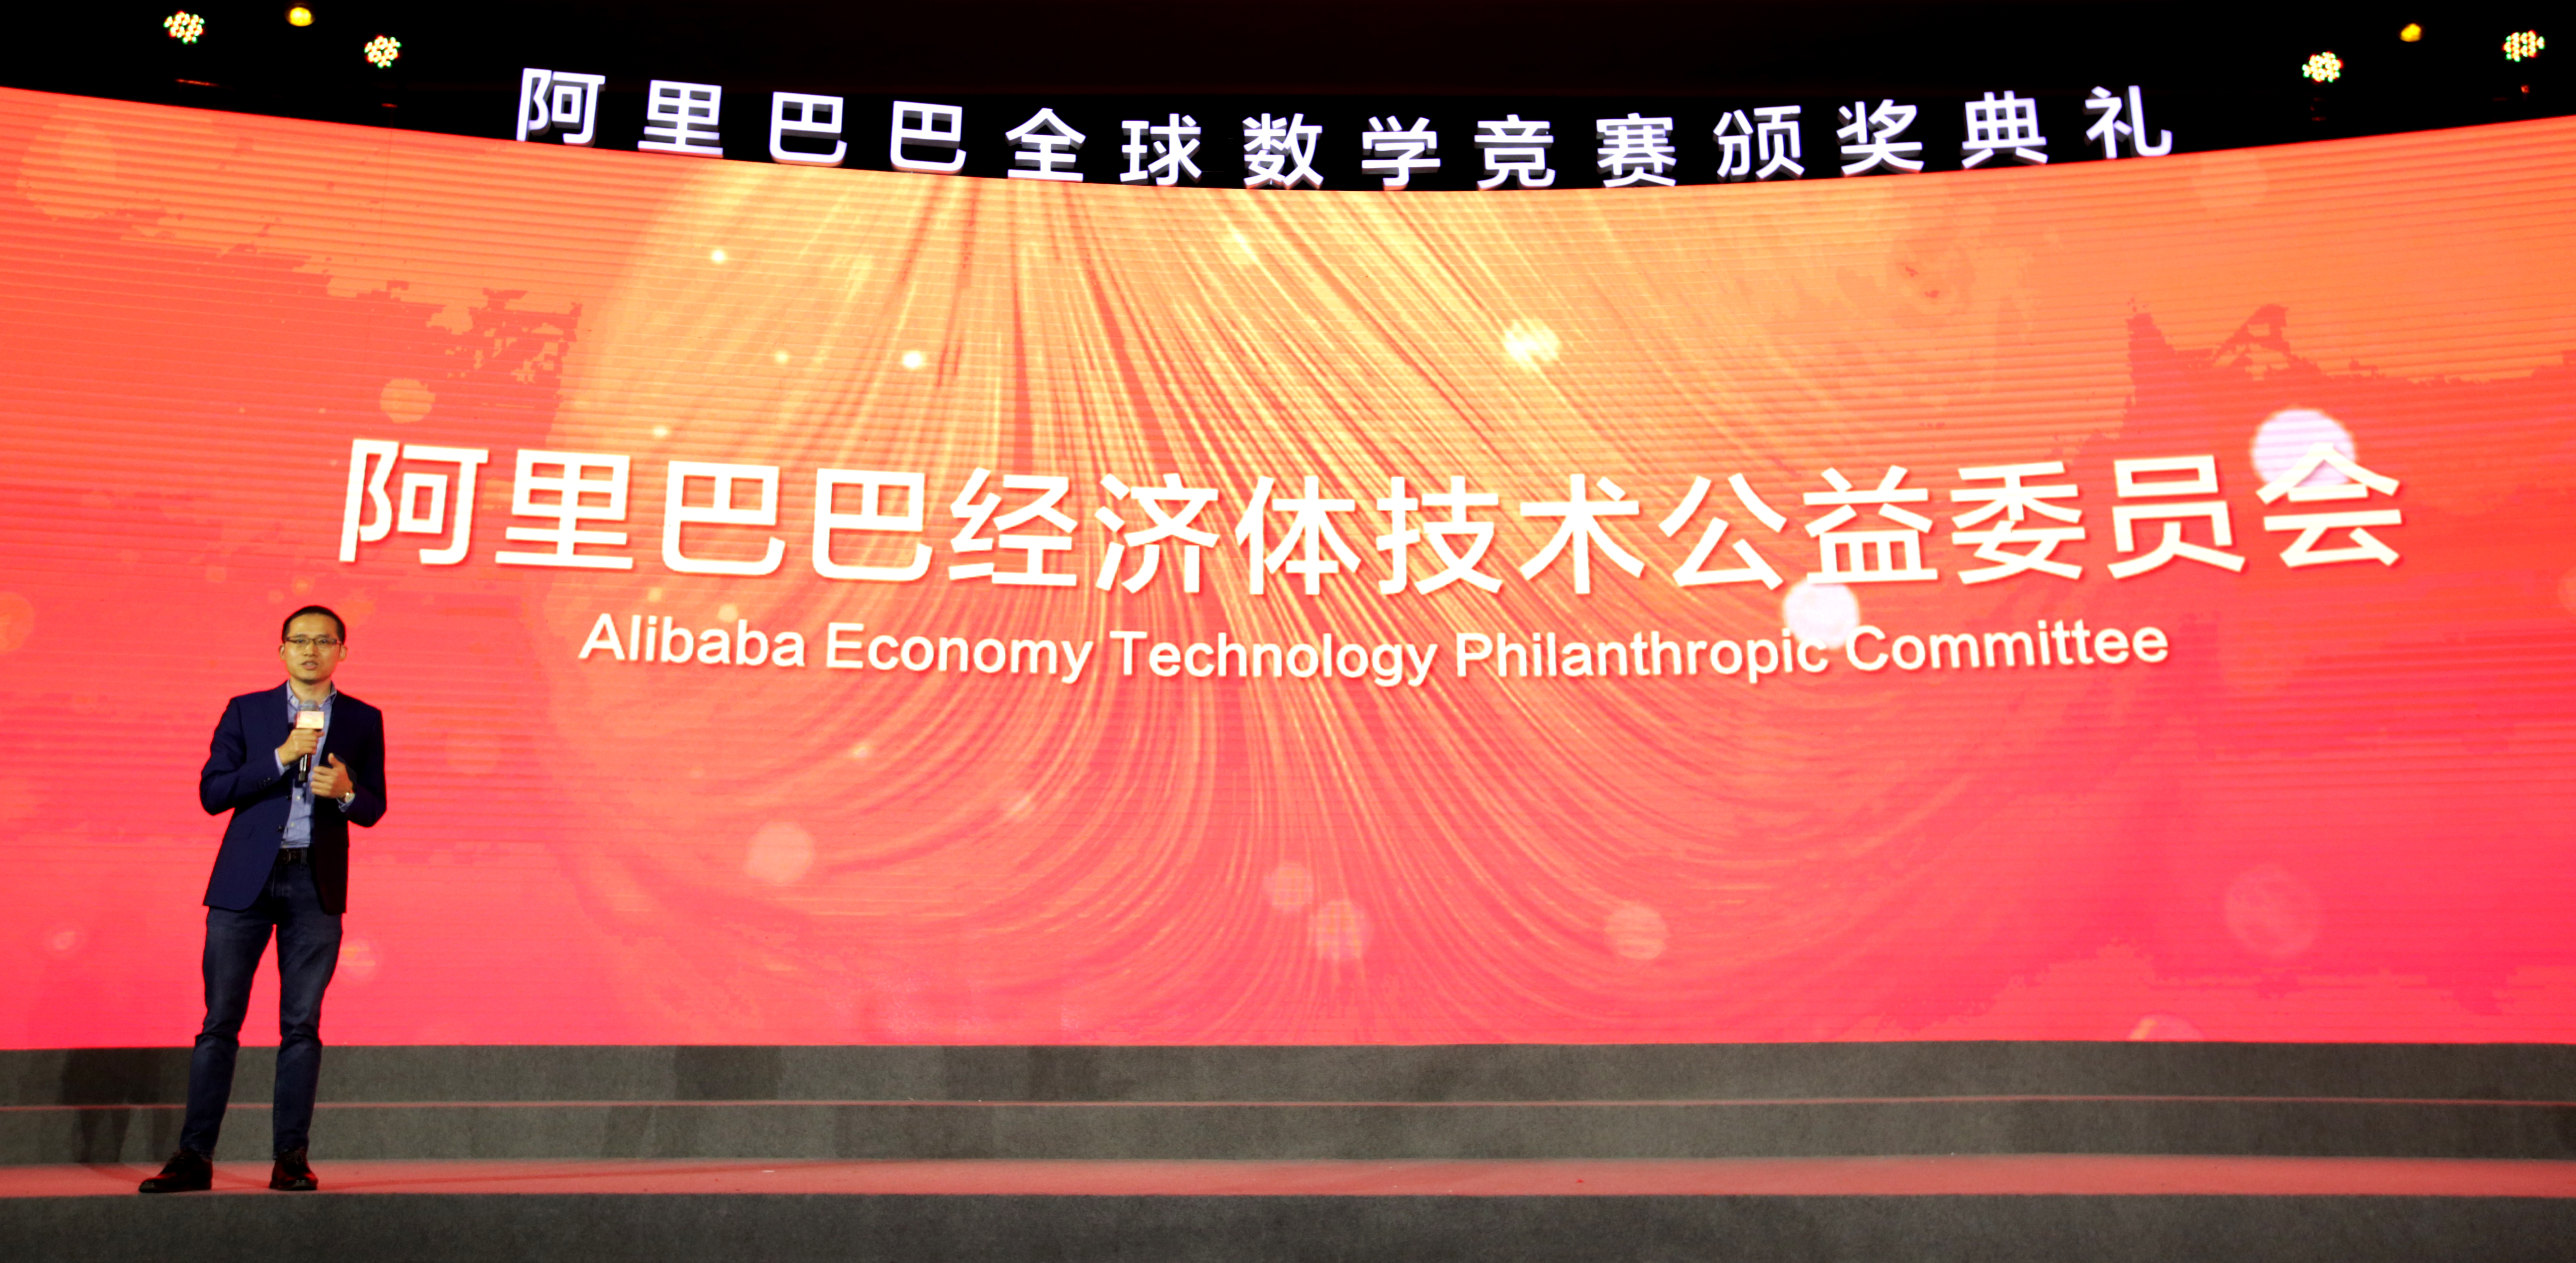 Alibaba CTO Jeff Zhang announces launch of new technology philanthropic committee_03292019